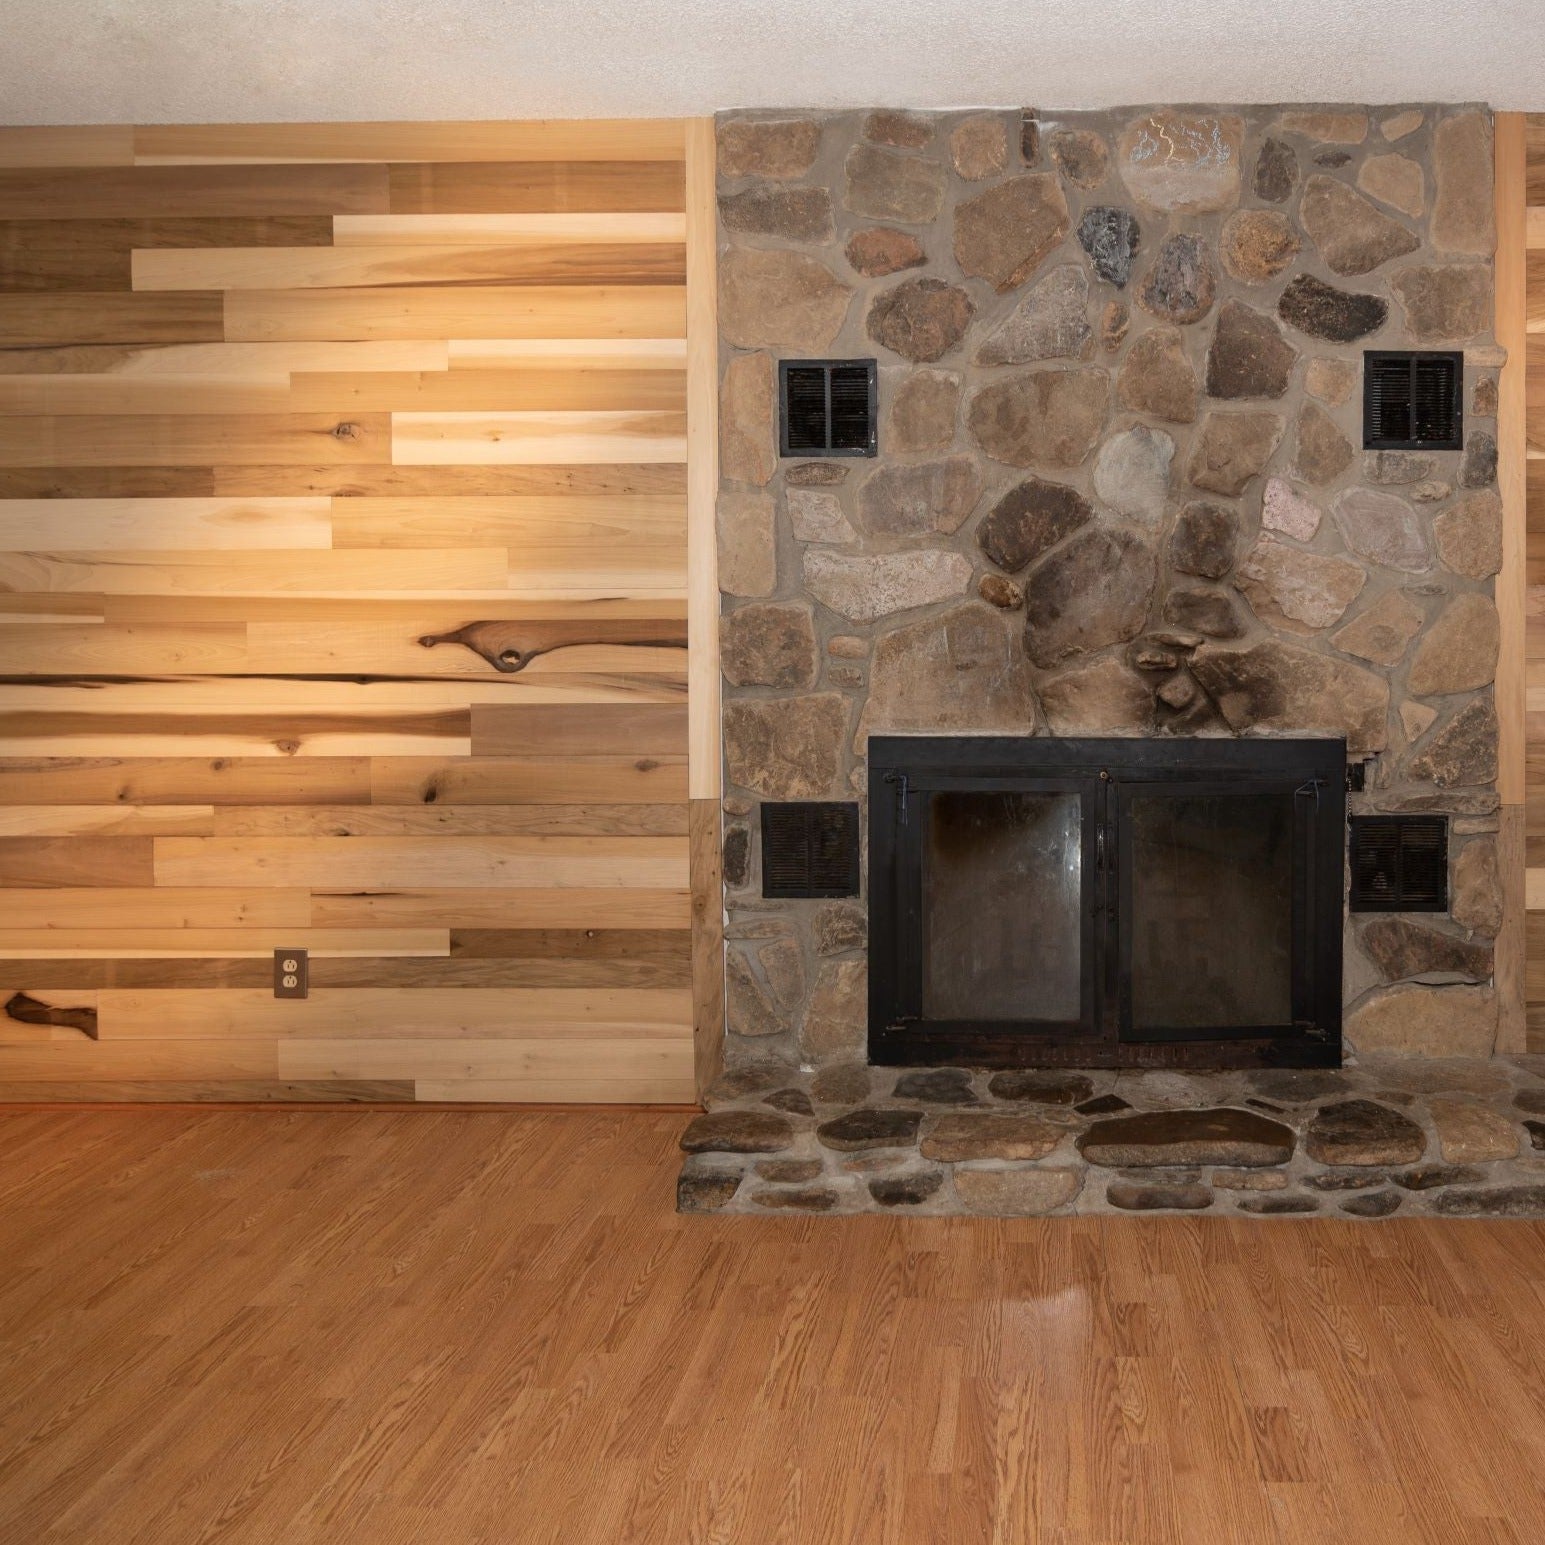 Reclaimed minteral poplar wooden living room wall with a stone fireplace.